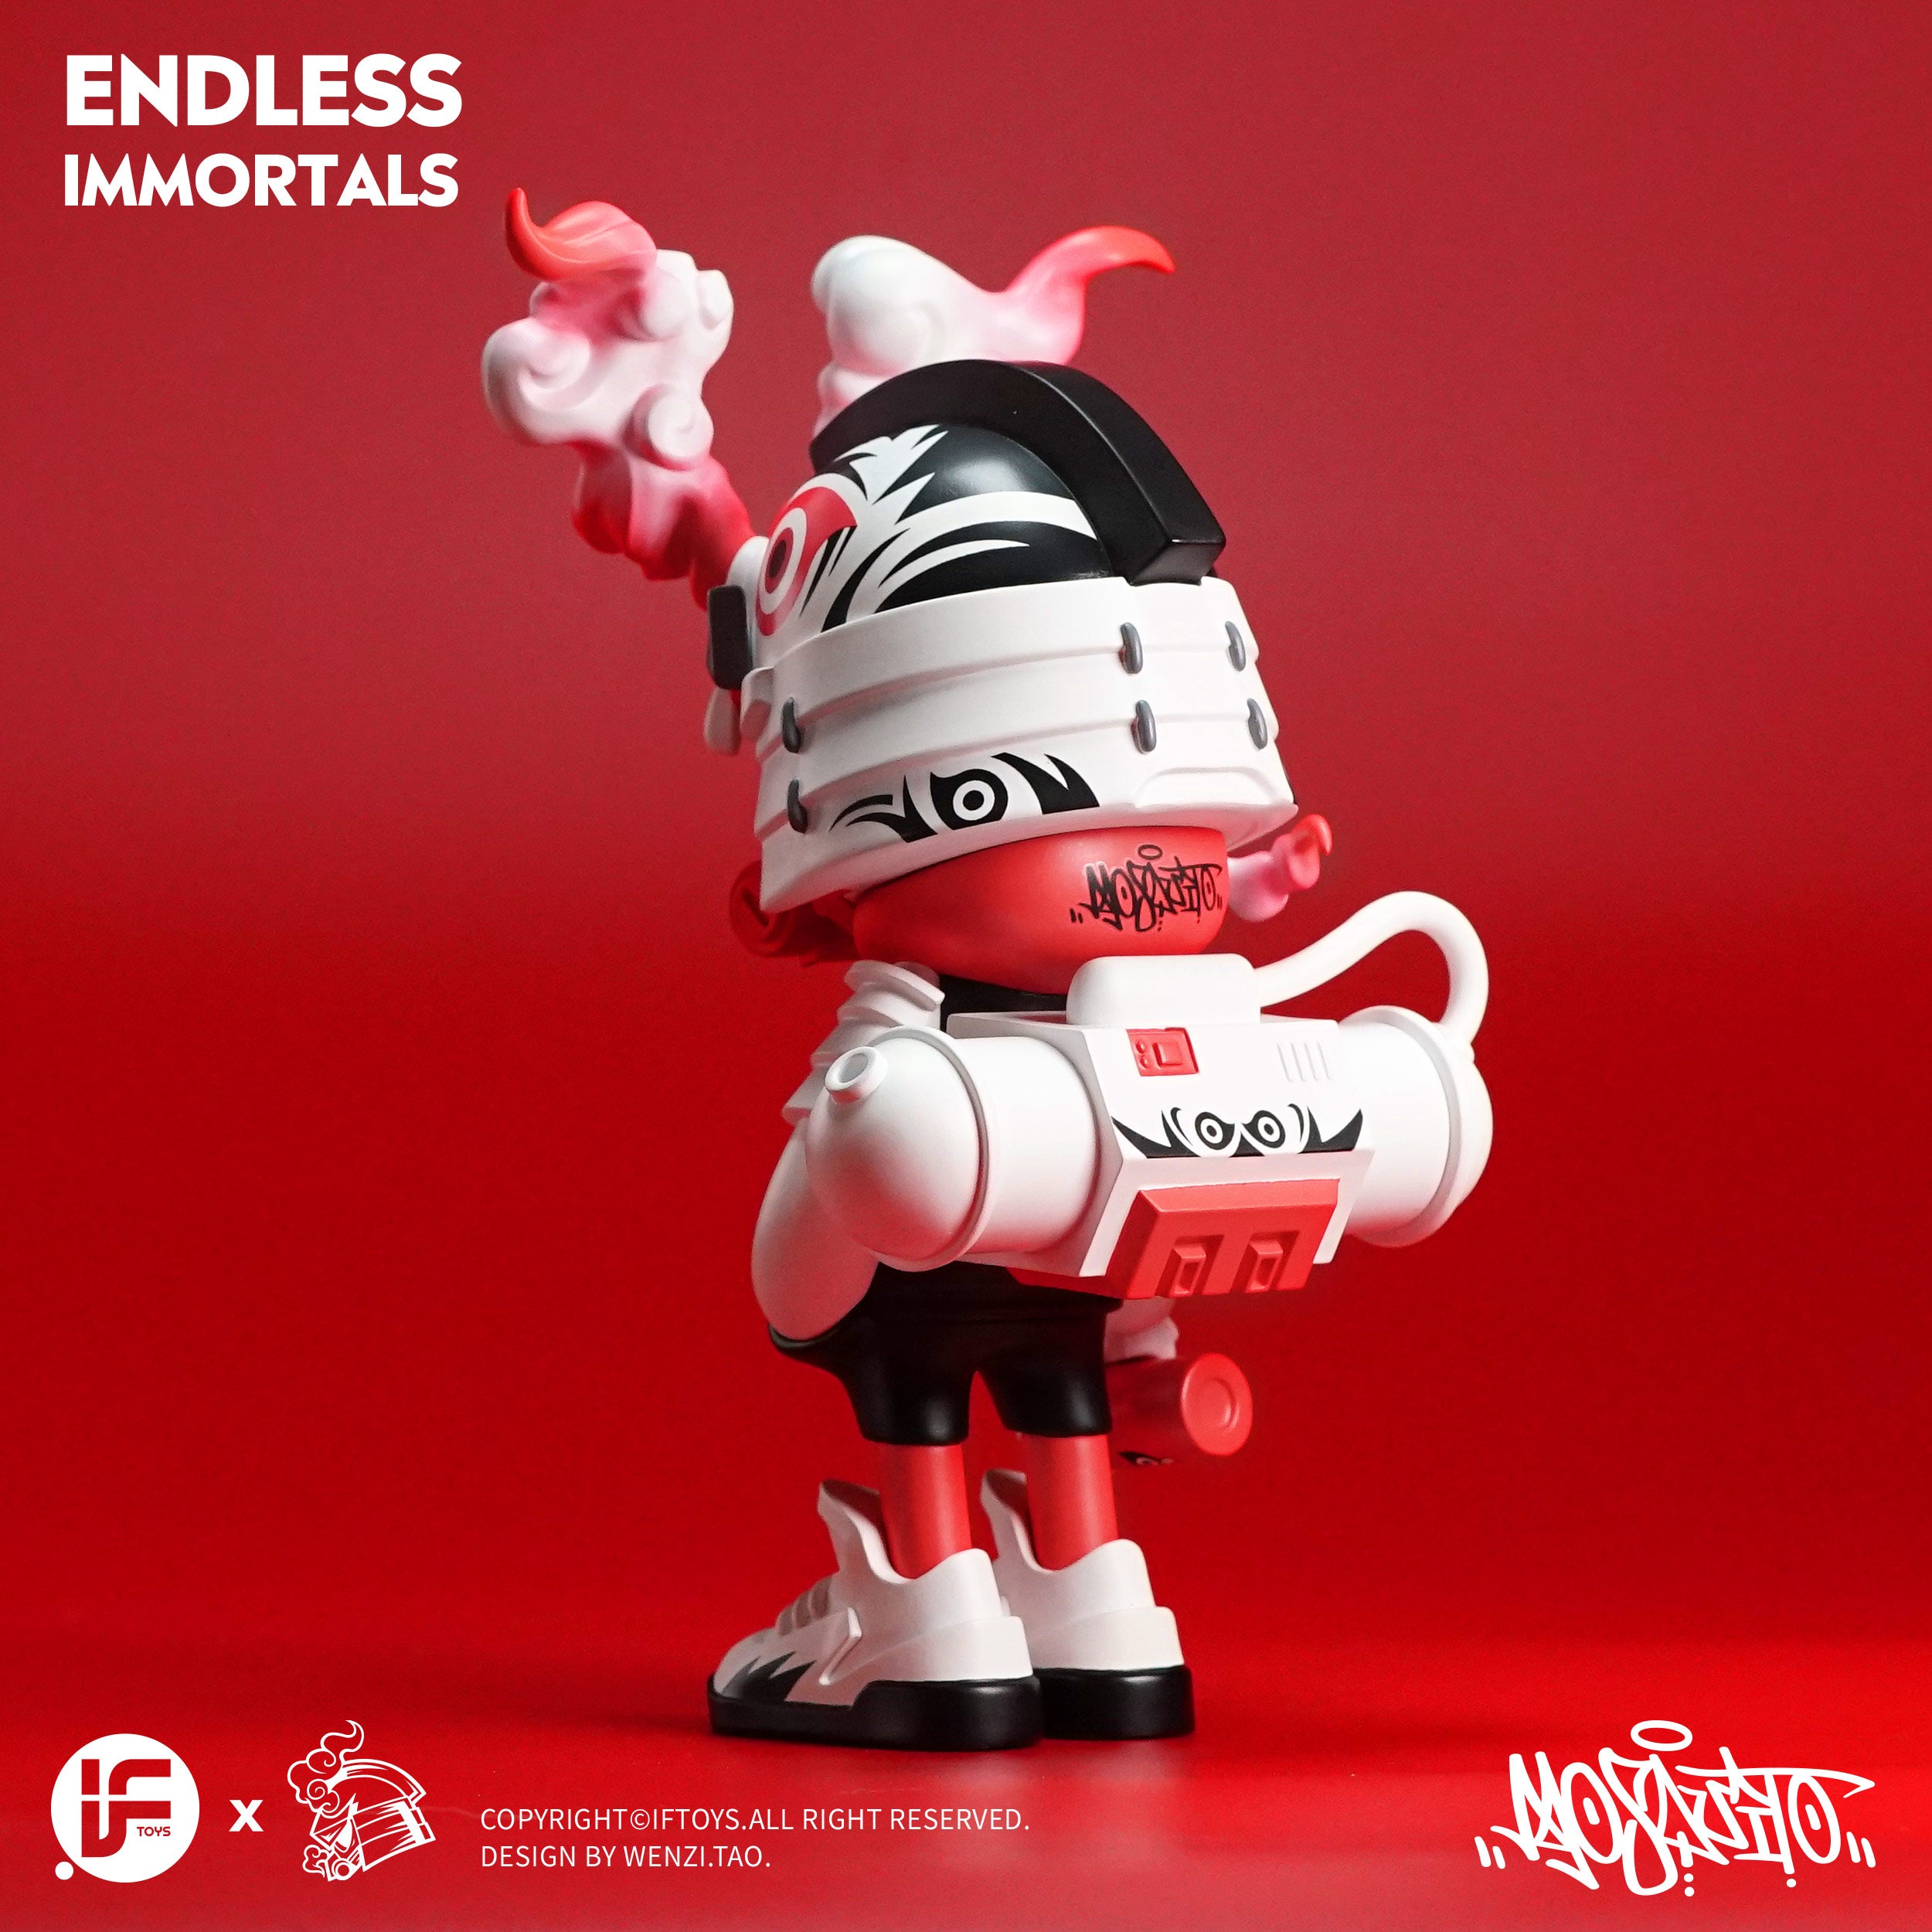 ENDLESS IMMORTALS - THE CLOTH TIGHT (2022 YEAR OF TIGER LIMITED EDITION) By Wenzi.Tao x Iftoys